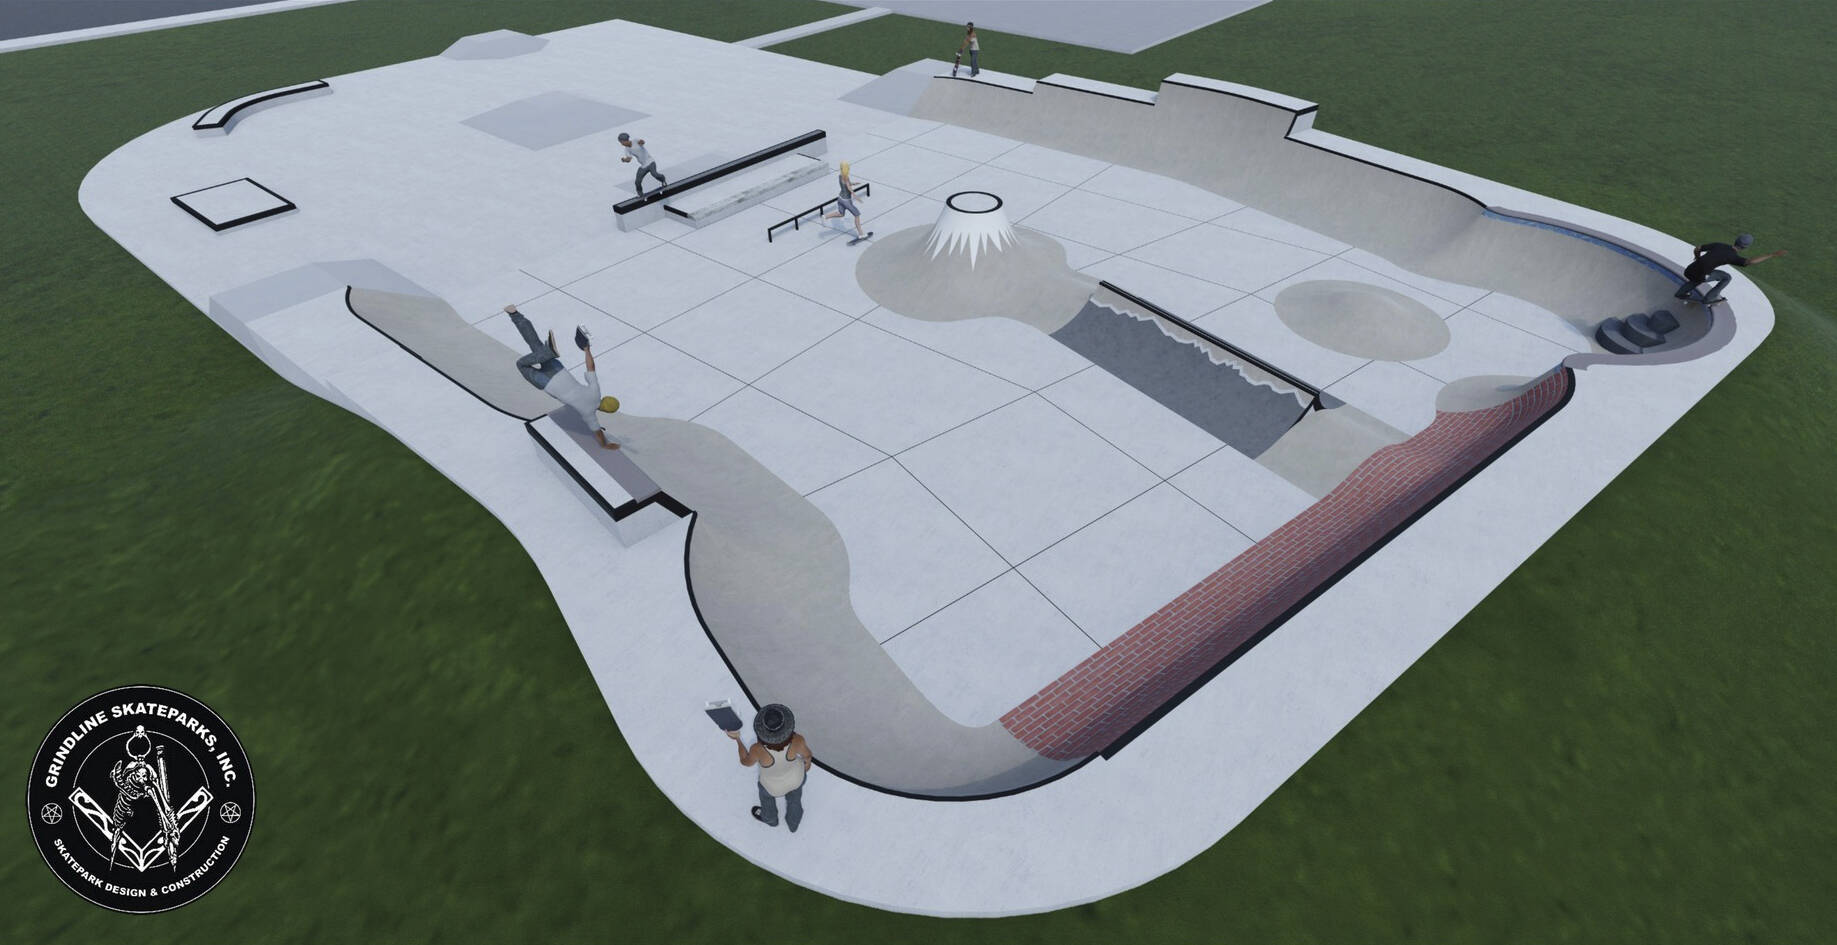 Image courtesy Grindline Skateparks 
The preliminary design for Enumclaw’s new skatepark; head to tinyurl.com/enumclaw-skatepark-project to see more pictures or give your thoughts on the project.